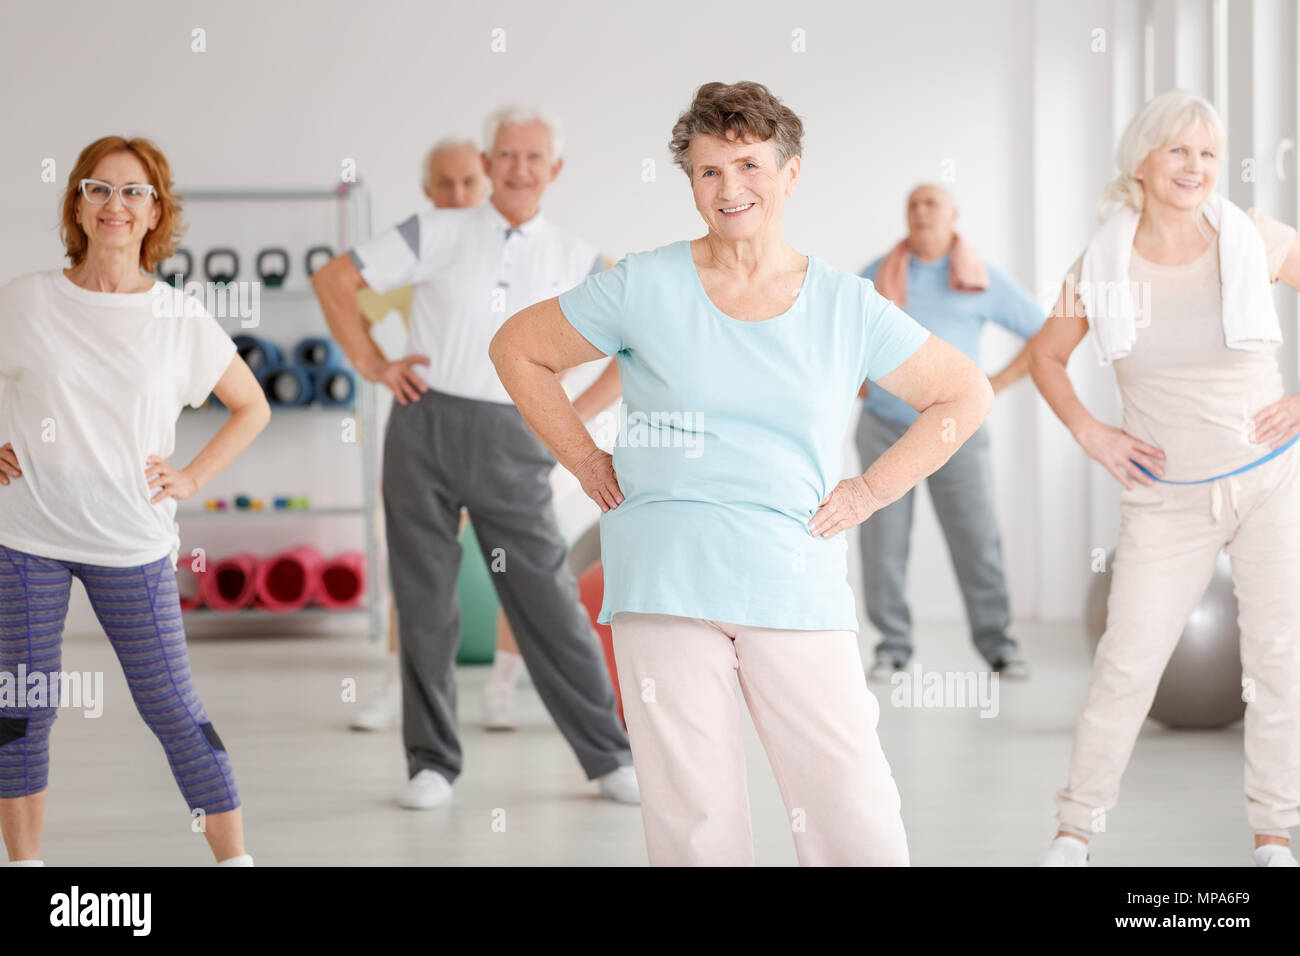 Group of active seniors exercising in fitness club Stock Photo